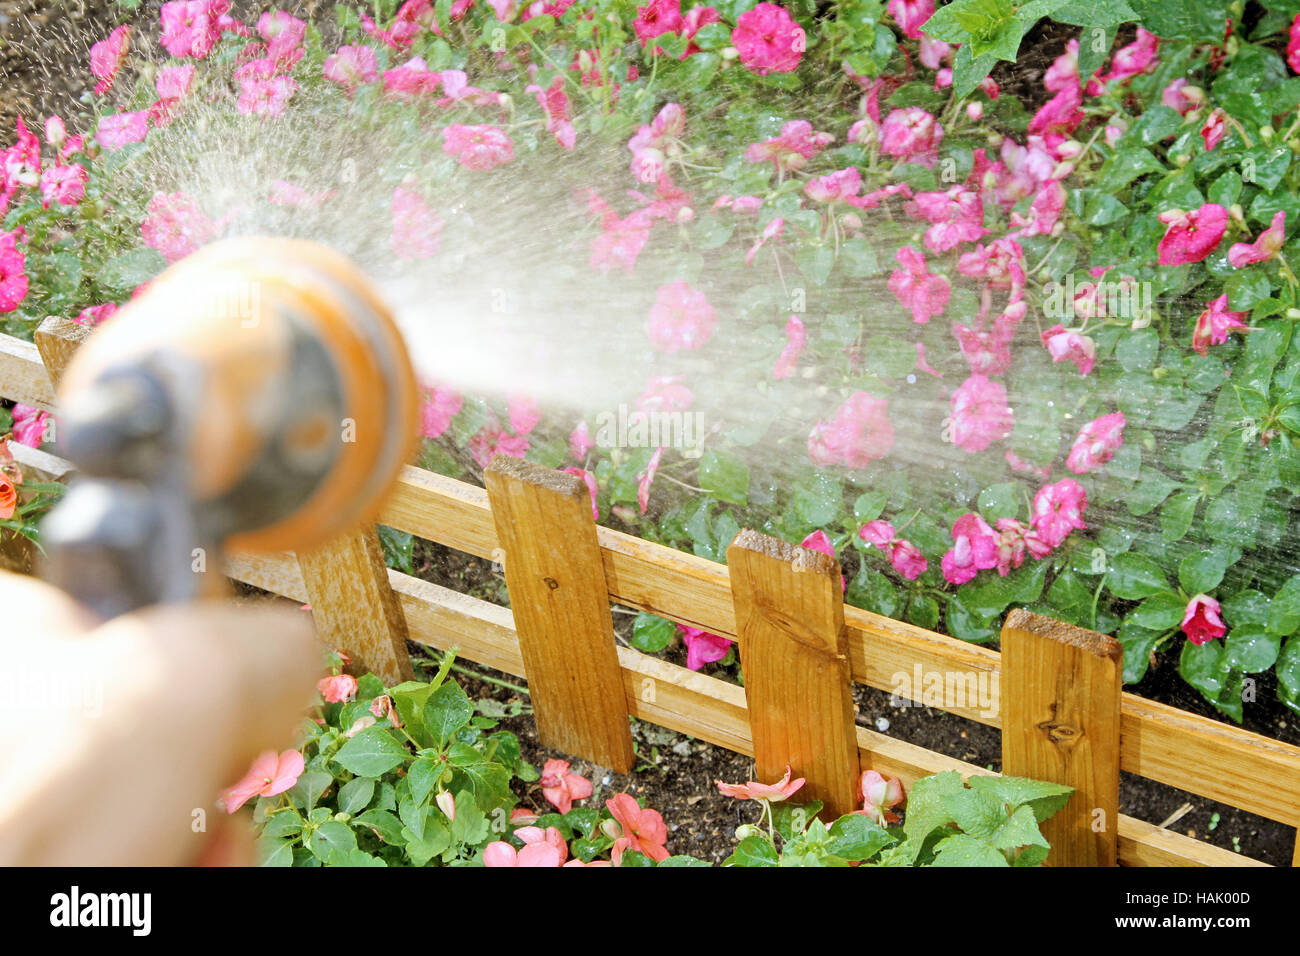 watering flowers with a garden hose Stock Photo